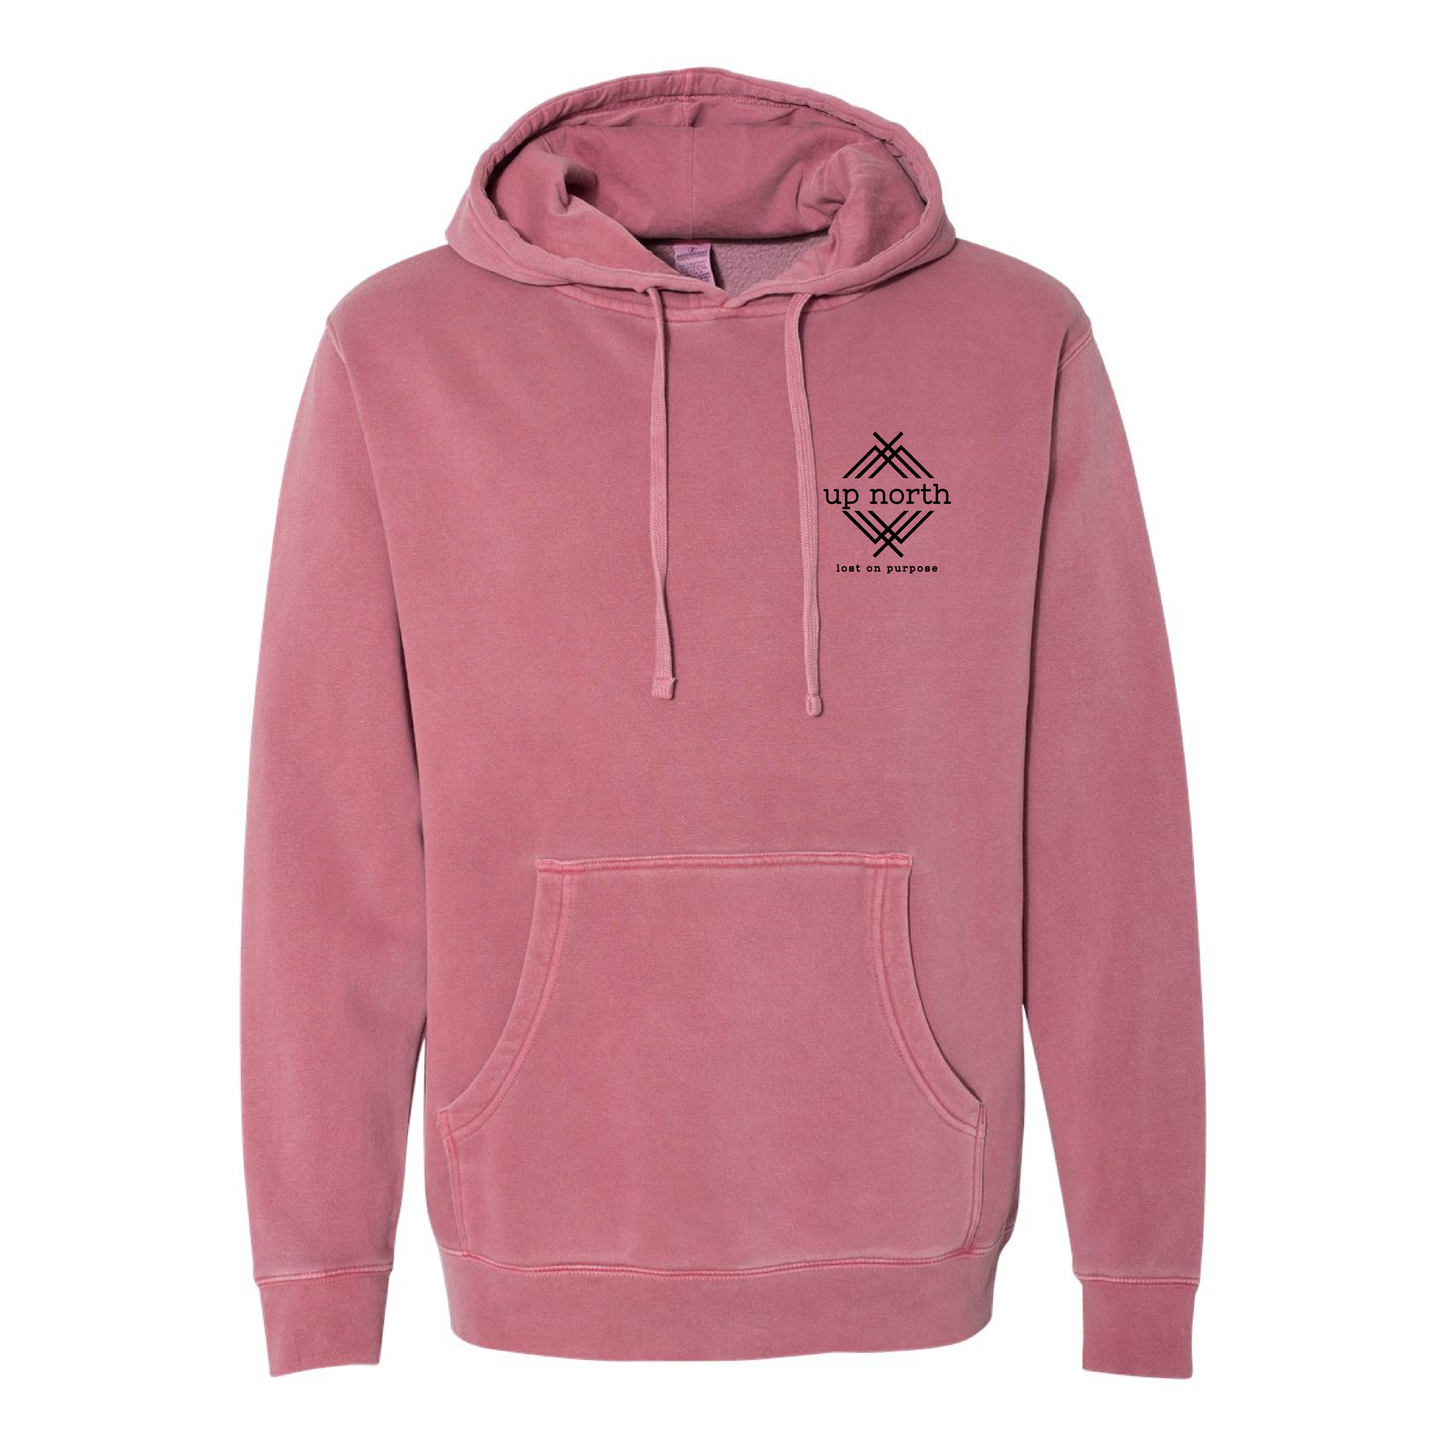 Lost on Purpose - Pigment Dyed Hoodie - Washed Maroon